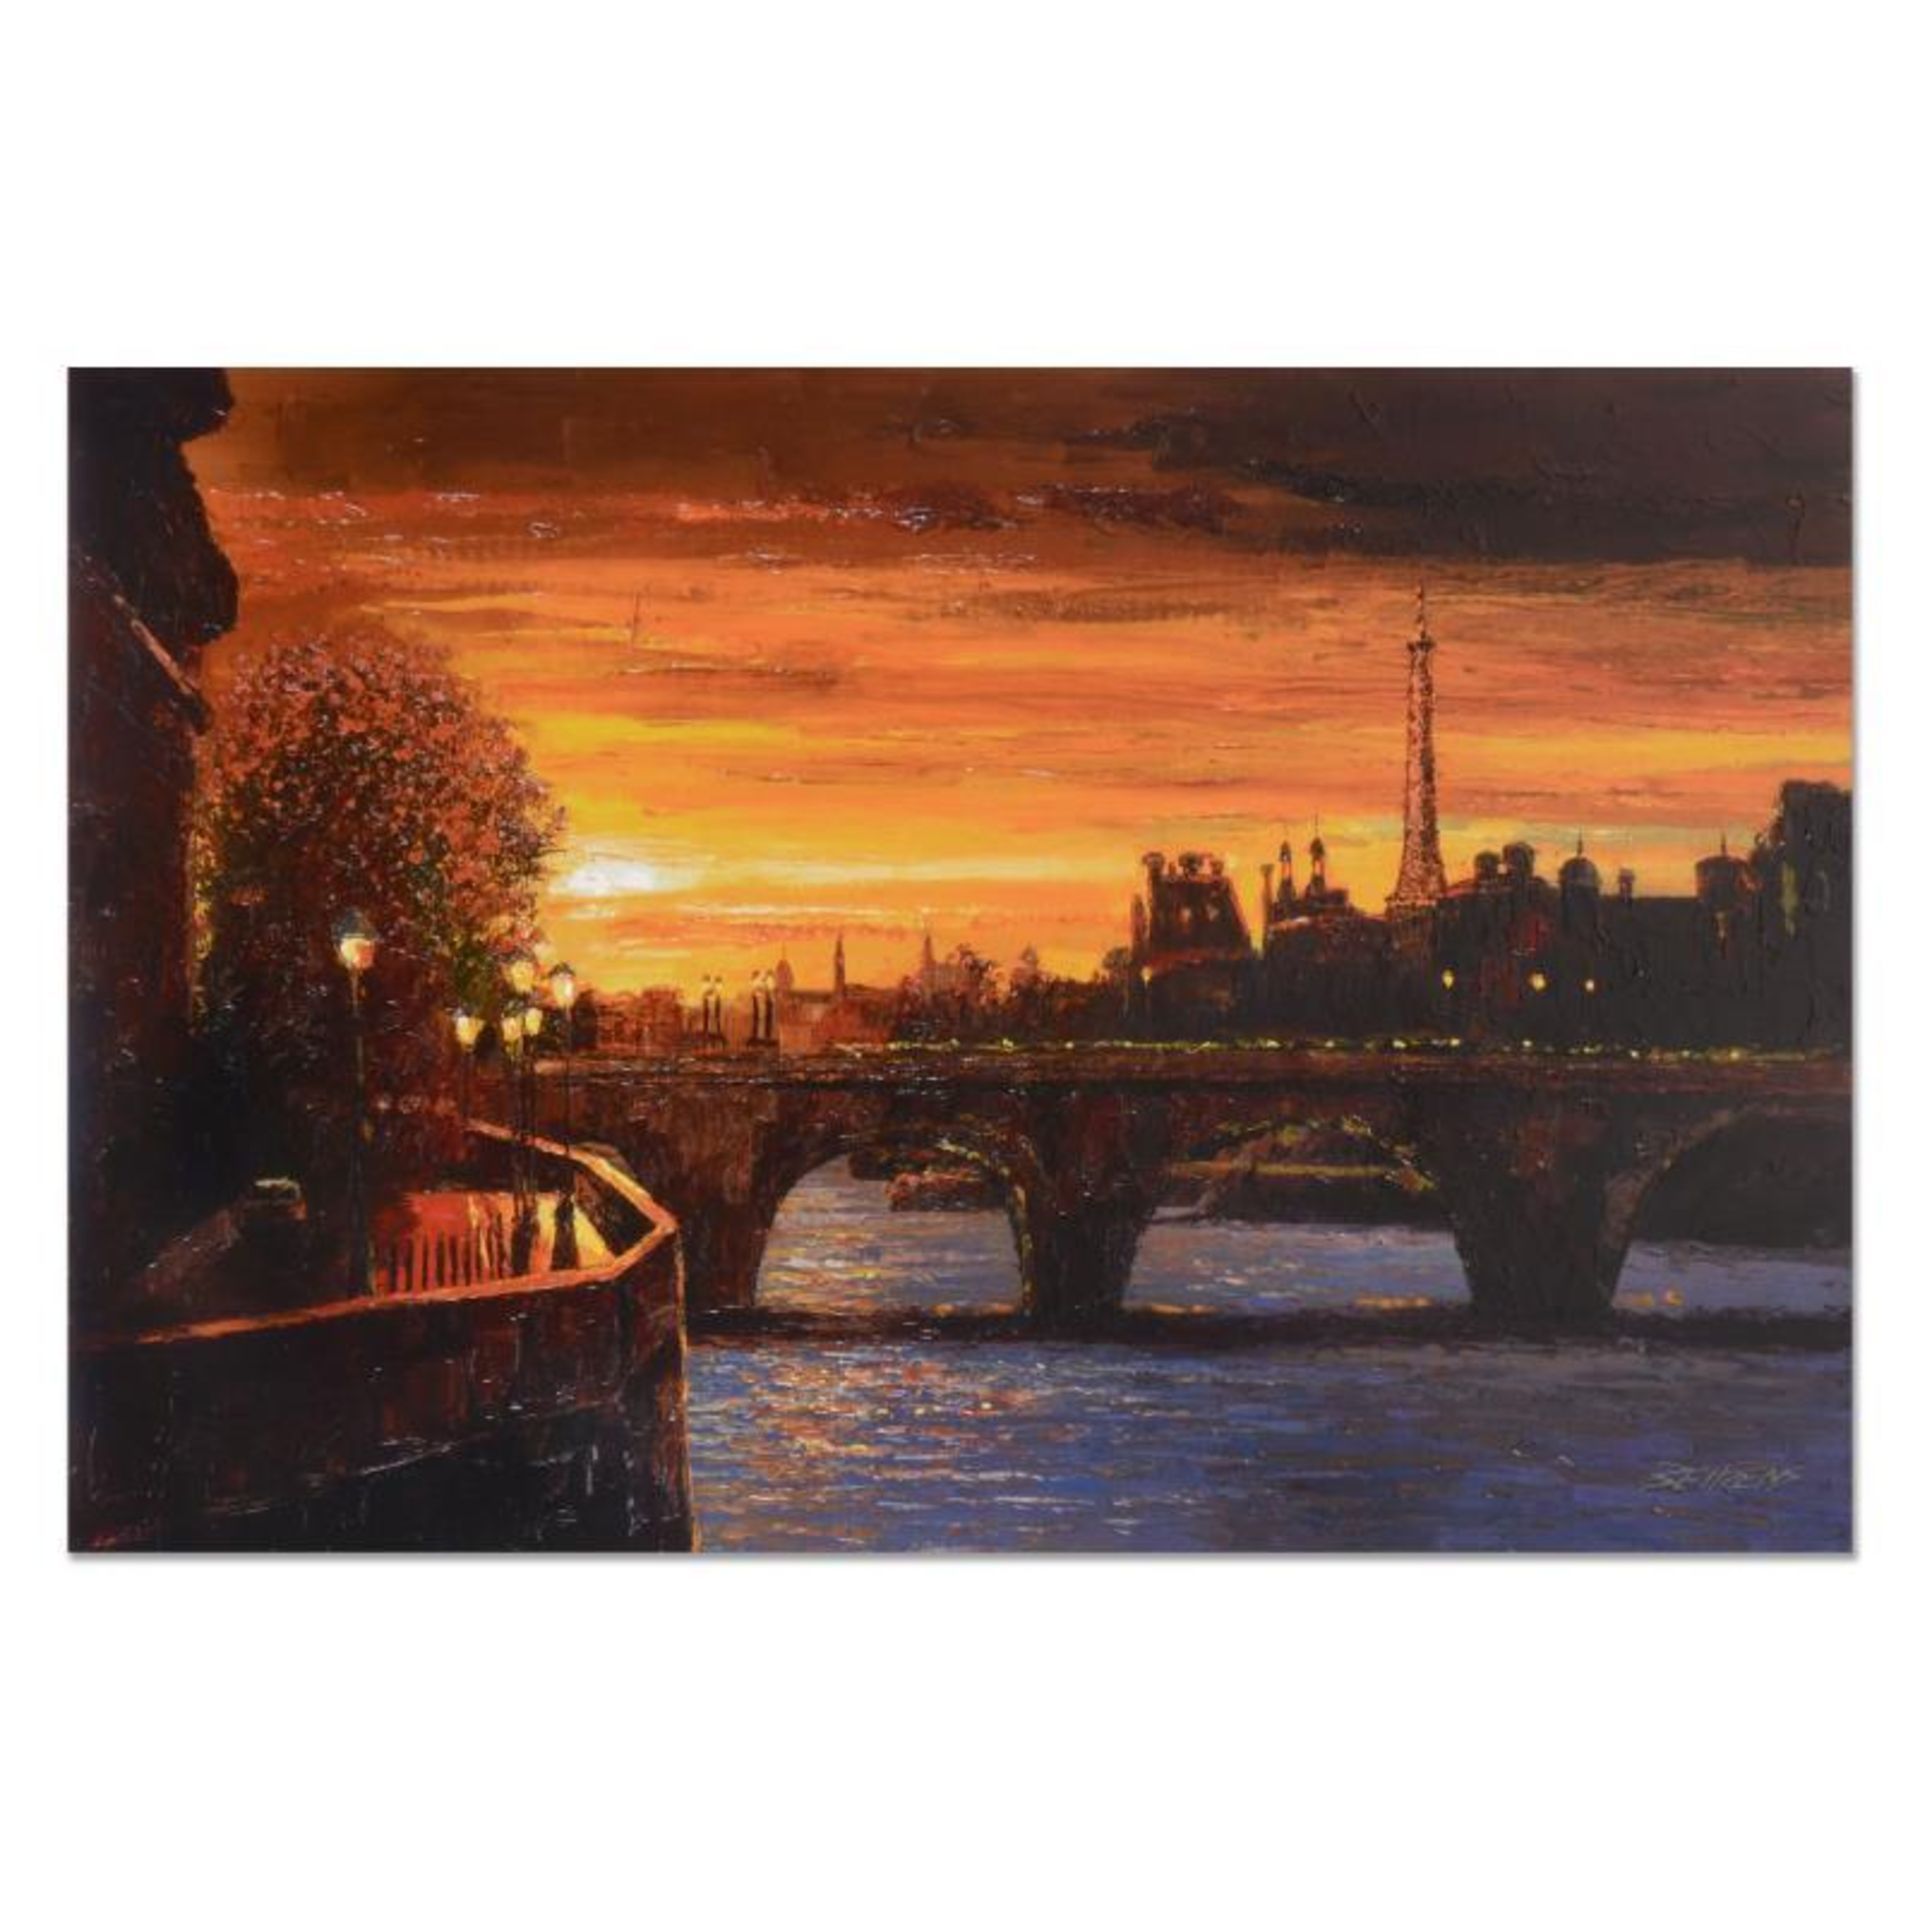 Howard Behrens (1933-2014), "Twilight On The Seine II" Limited Edition on Canvas